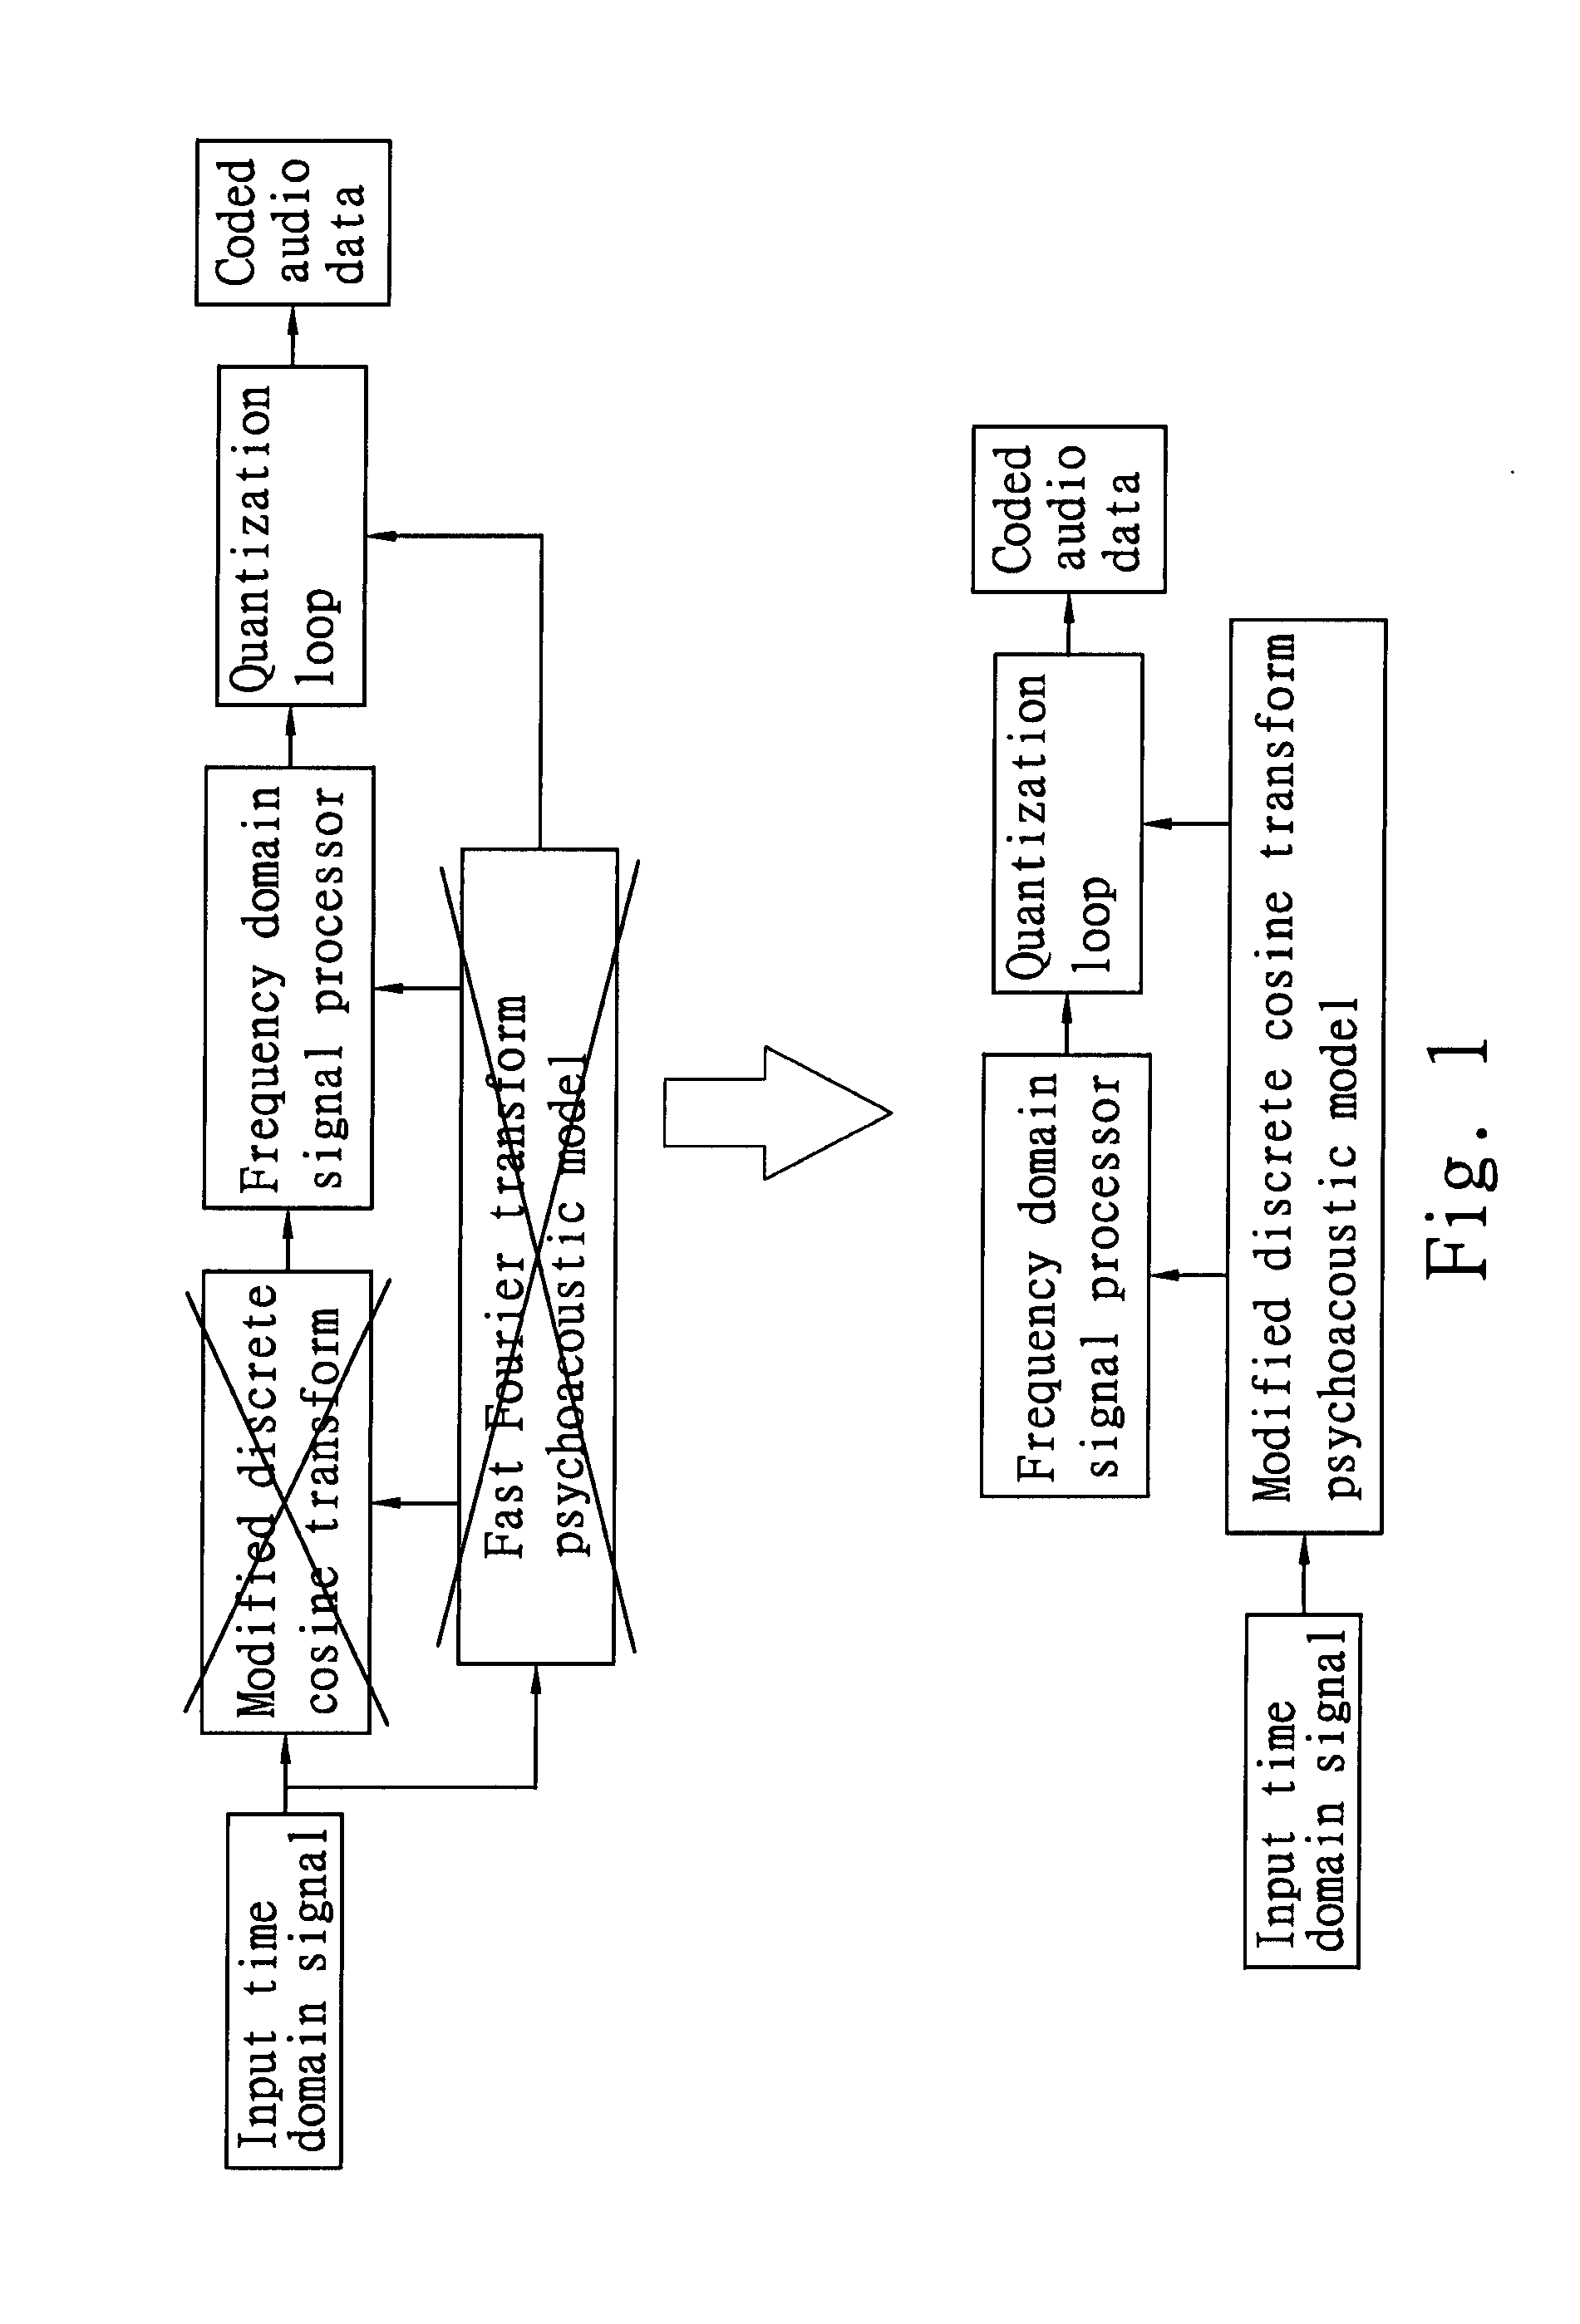 Method and Apparatus of Low-Complexity Psychoacoustic Model Applicable for Advanced Audio Coding Encoders